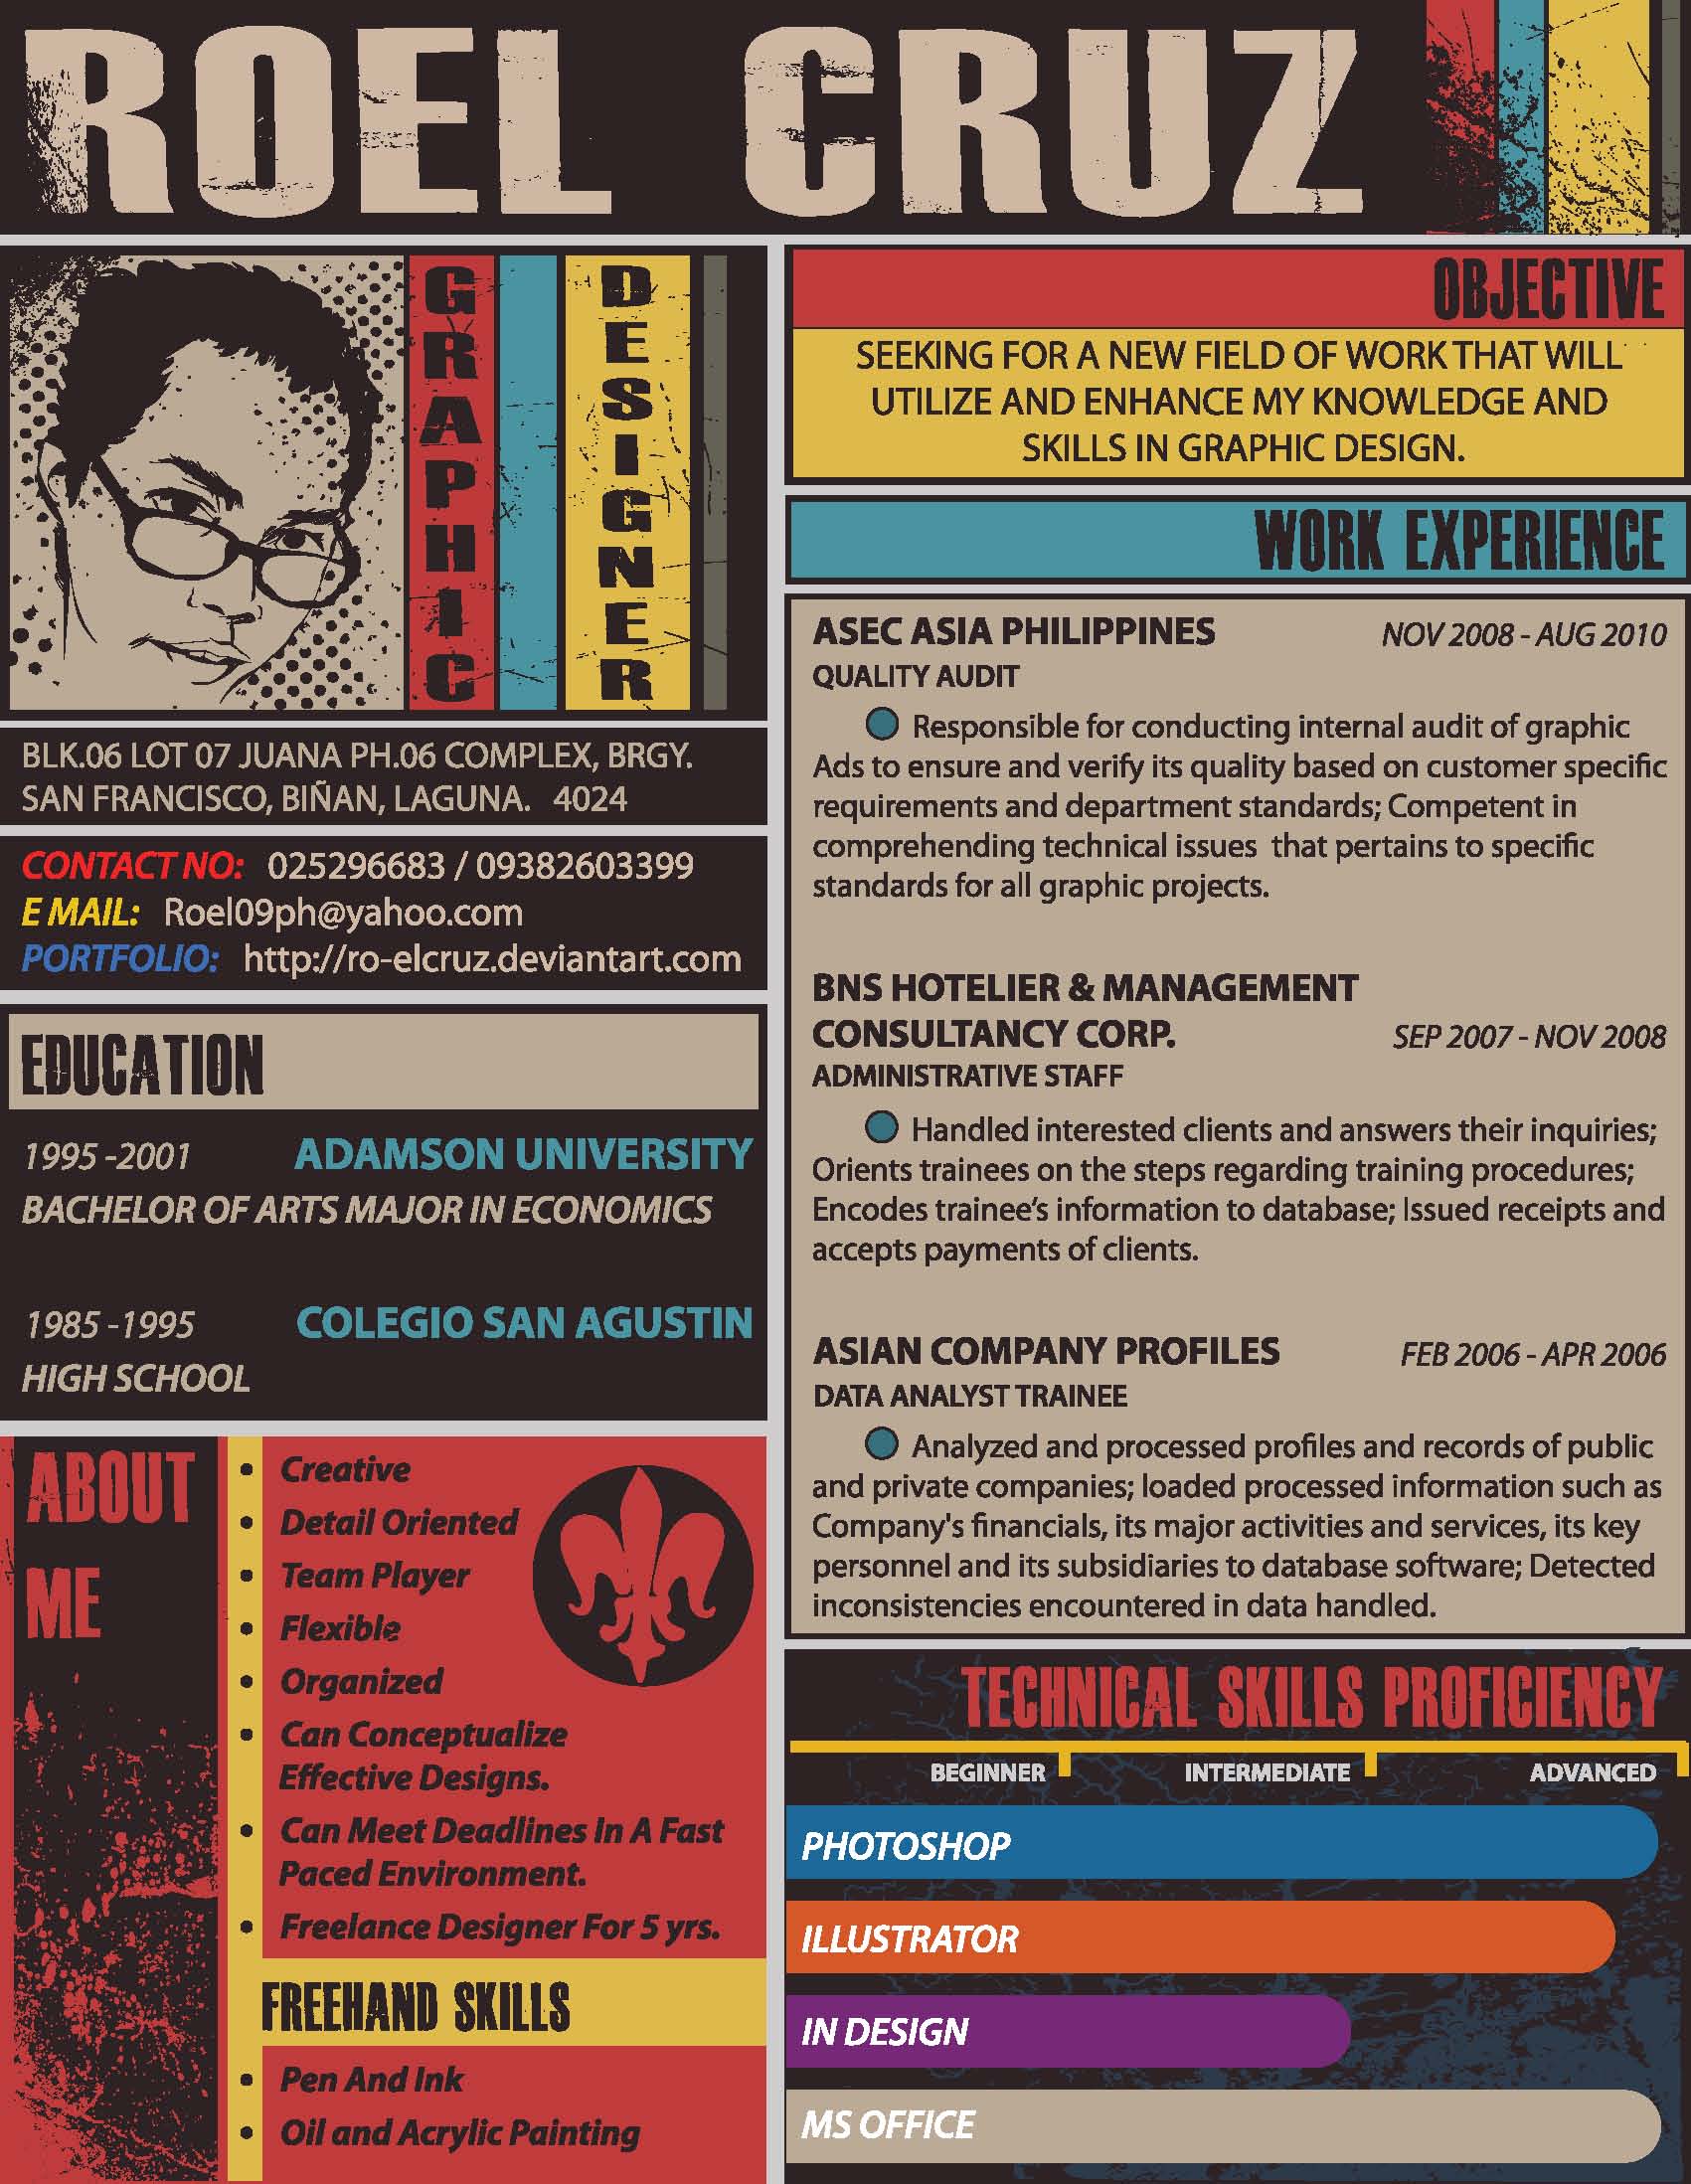 60 creative and funky resume designs